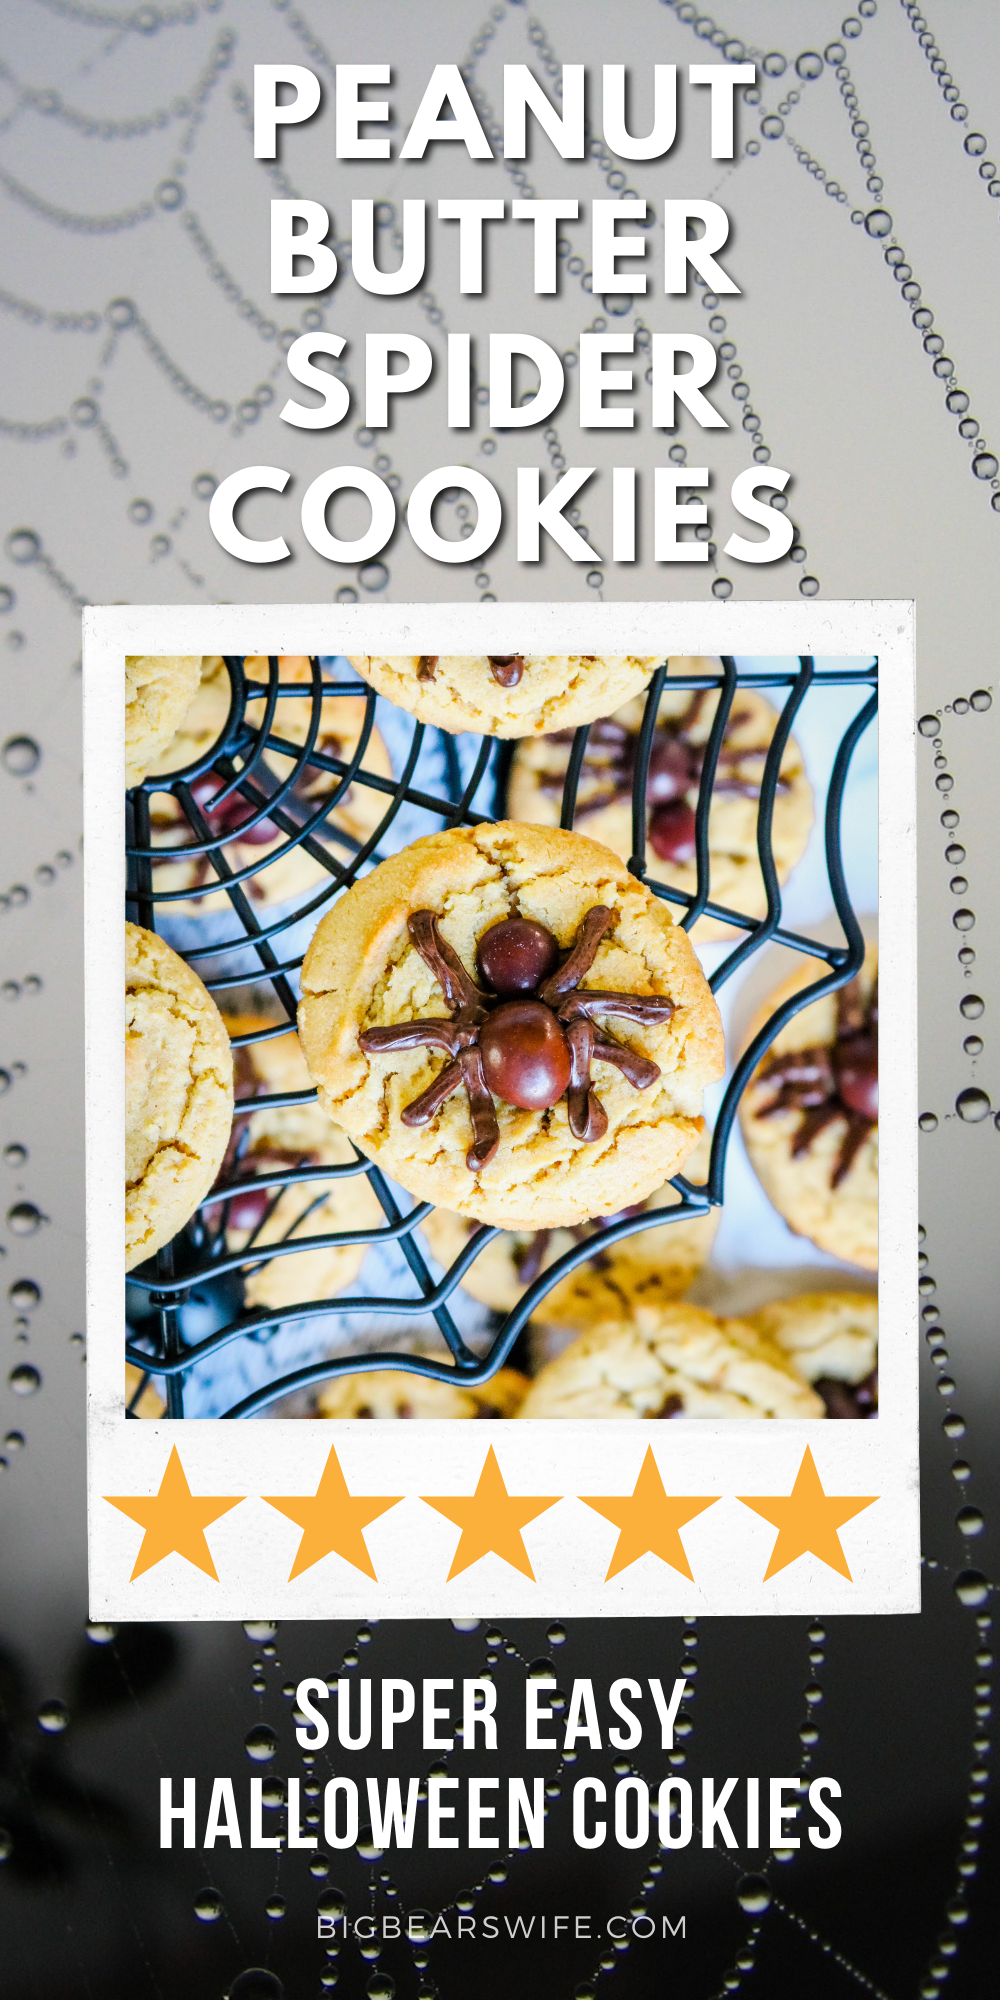 This Peanut Butter Spider Cookies recipe is an easy Halloween cookie recipe! These easy spider cookies are based on my favorite Peanut Butter Blossoms and the spiders are made with brown M&Ms and melted chocolate chips! If you need a cookie recipe for a Halloween Party Dessert or something fun to make with the kids for Halloween, these peanut butter spider cookies are perfect for both.  via @bigbearswife